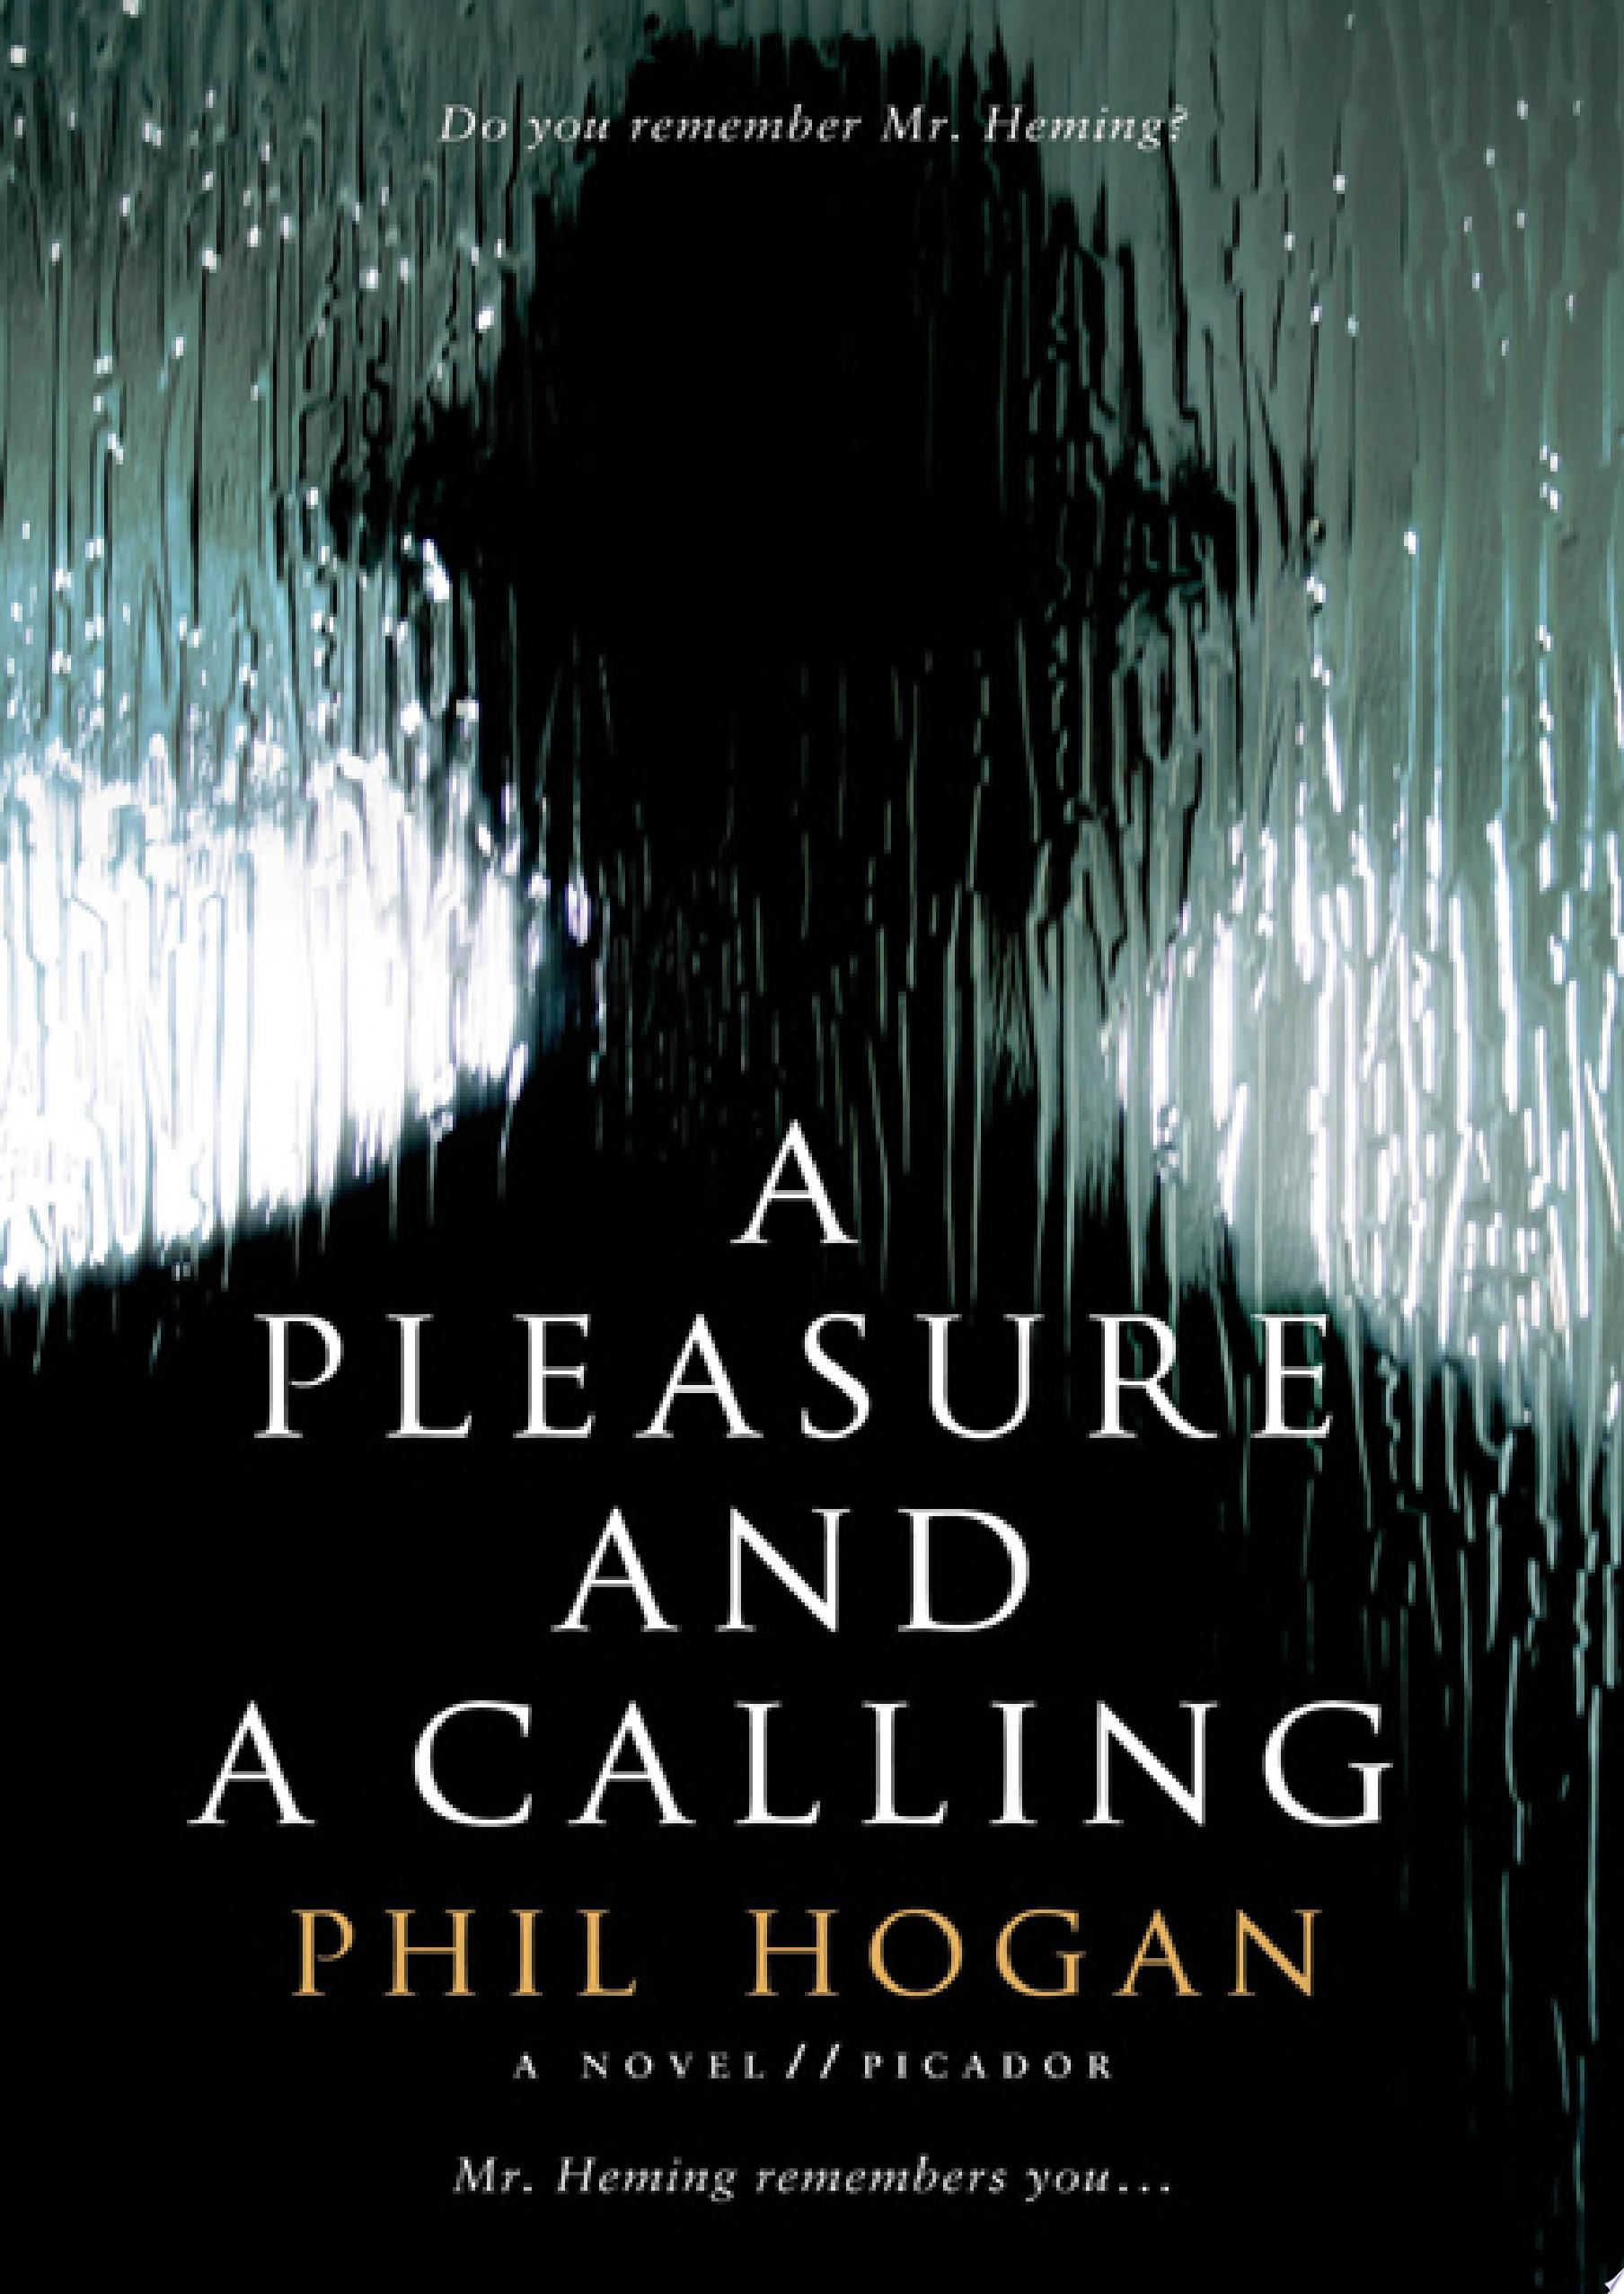 Image for "A Pleasure and a Calling"